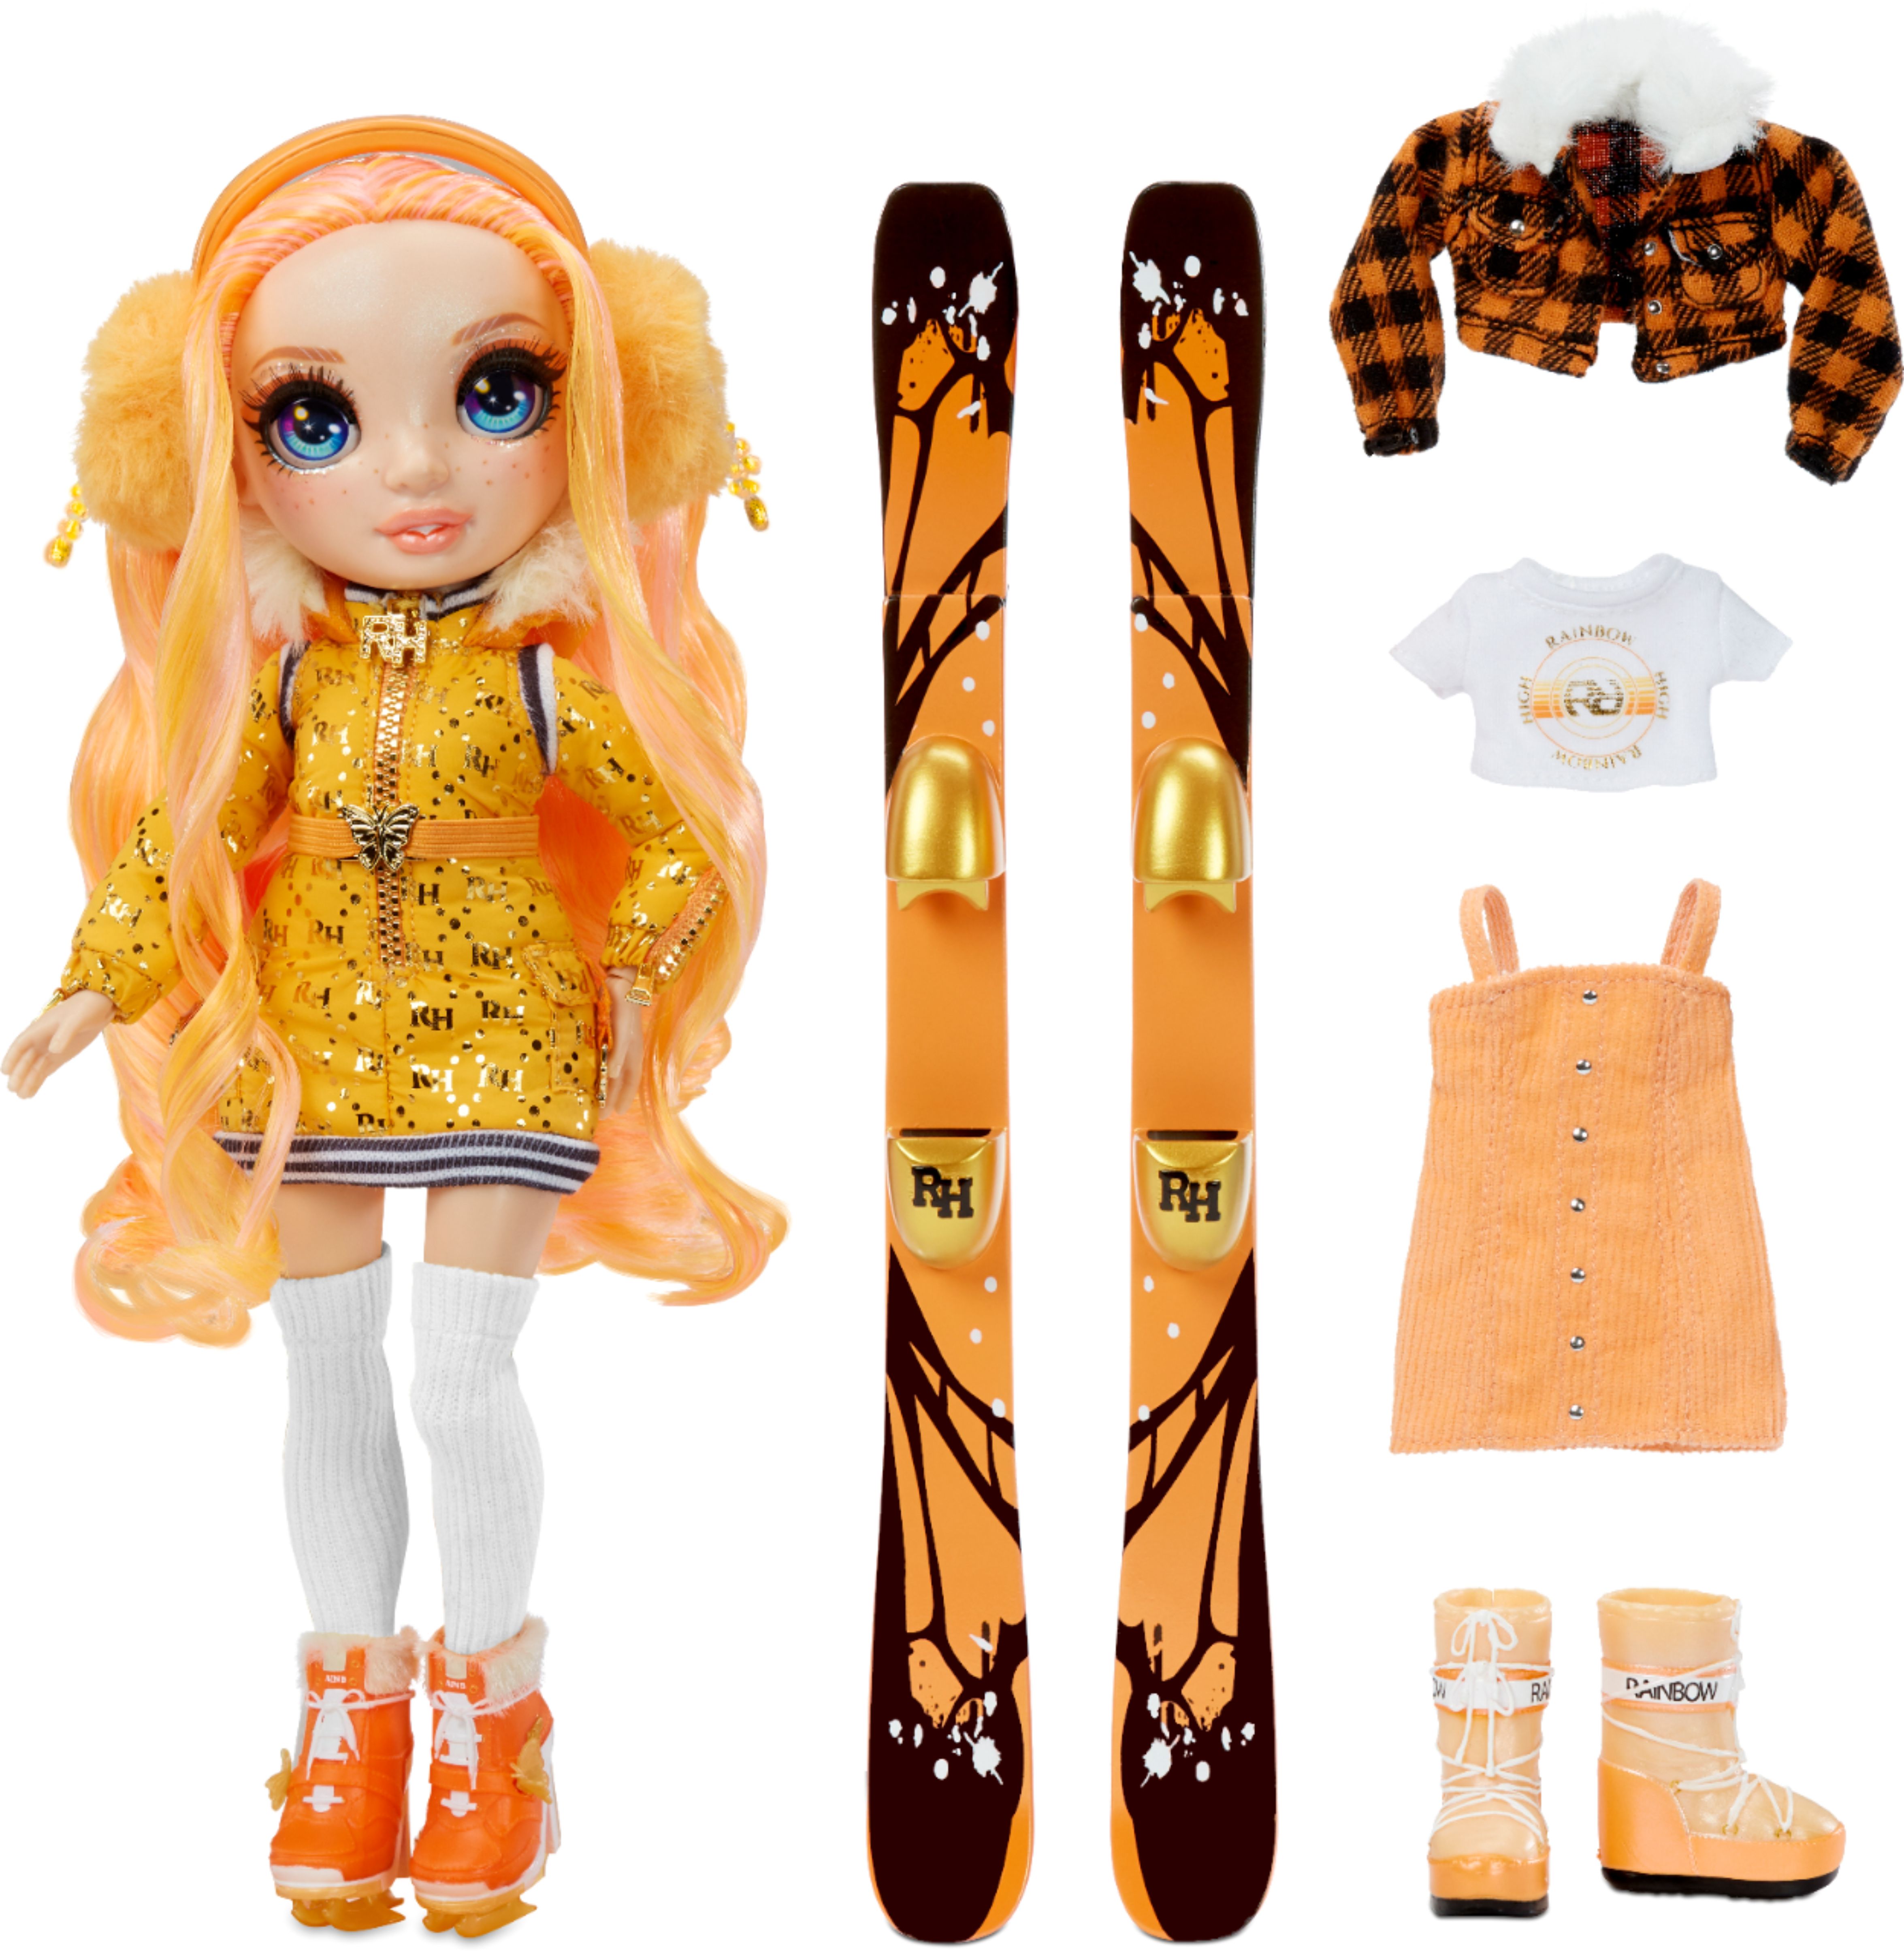 Rainbow High Fantastic Fashion Skyler Bradshaw - Blue 11” Fashion Doll and  Playset with 2 Complete Doll Outfits, and Fashion Play Accessories, Great  Gift for Kids 4-12 